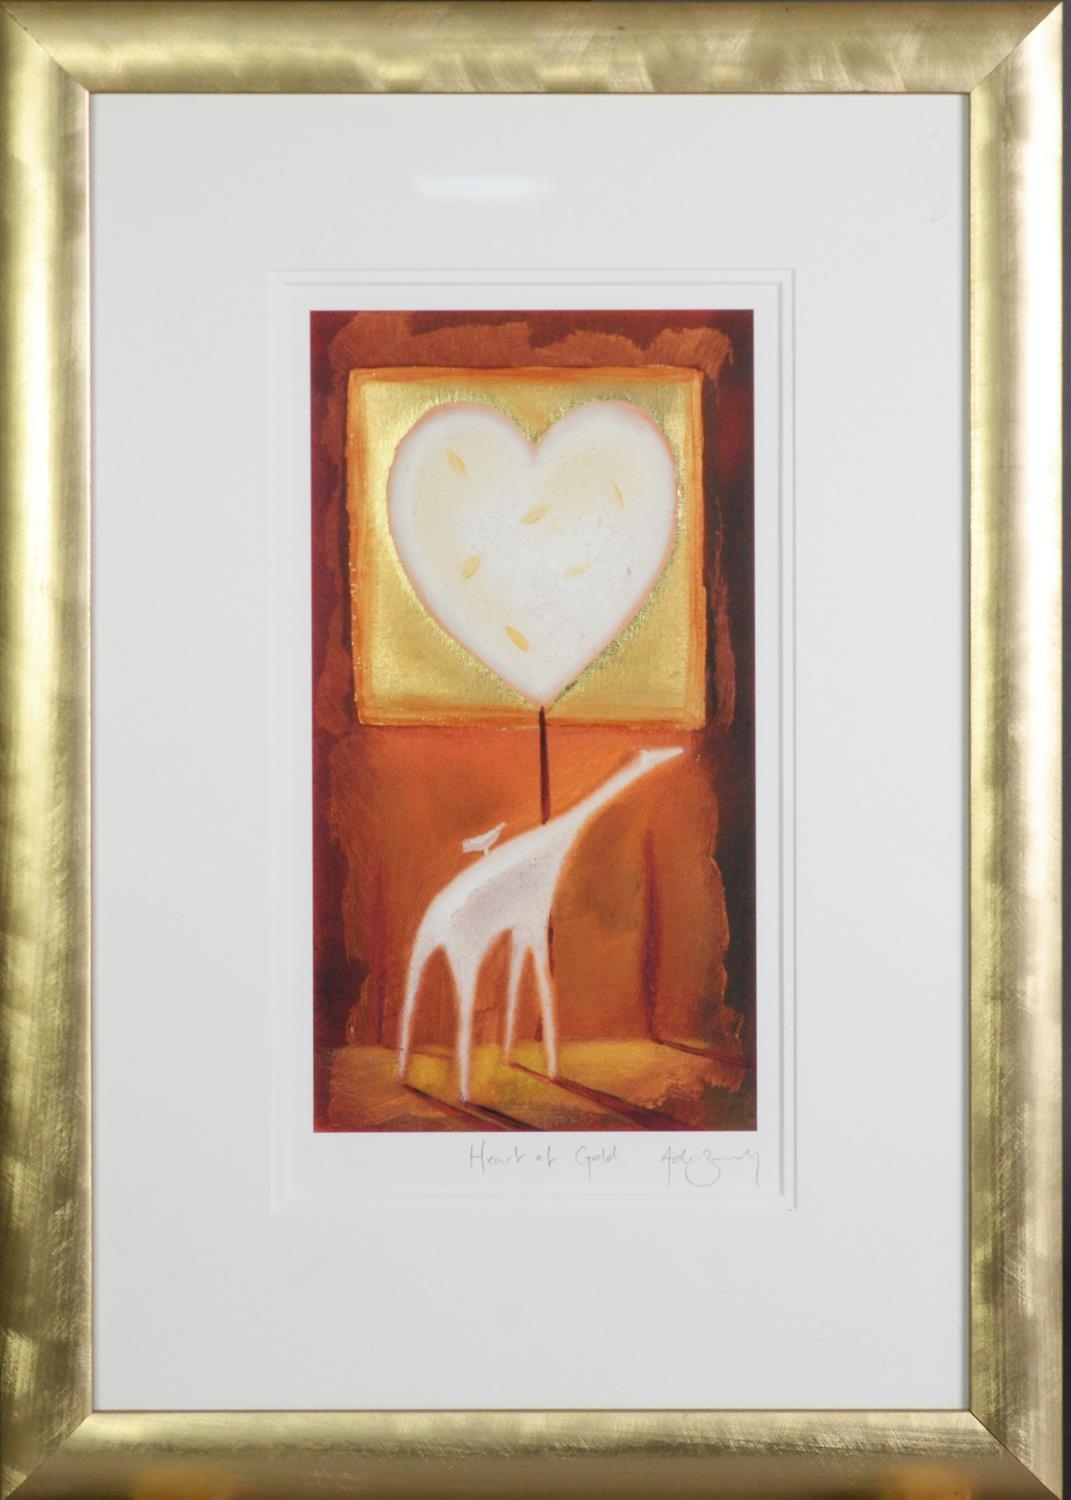 ADAM BARSBY (b.1969), ltd. ed. giclee print 'Heart of Gold' from his 'Of Gold' series, numbered - Image 2 of 2